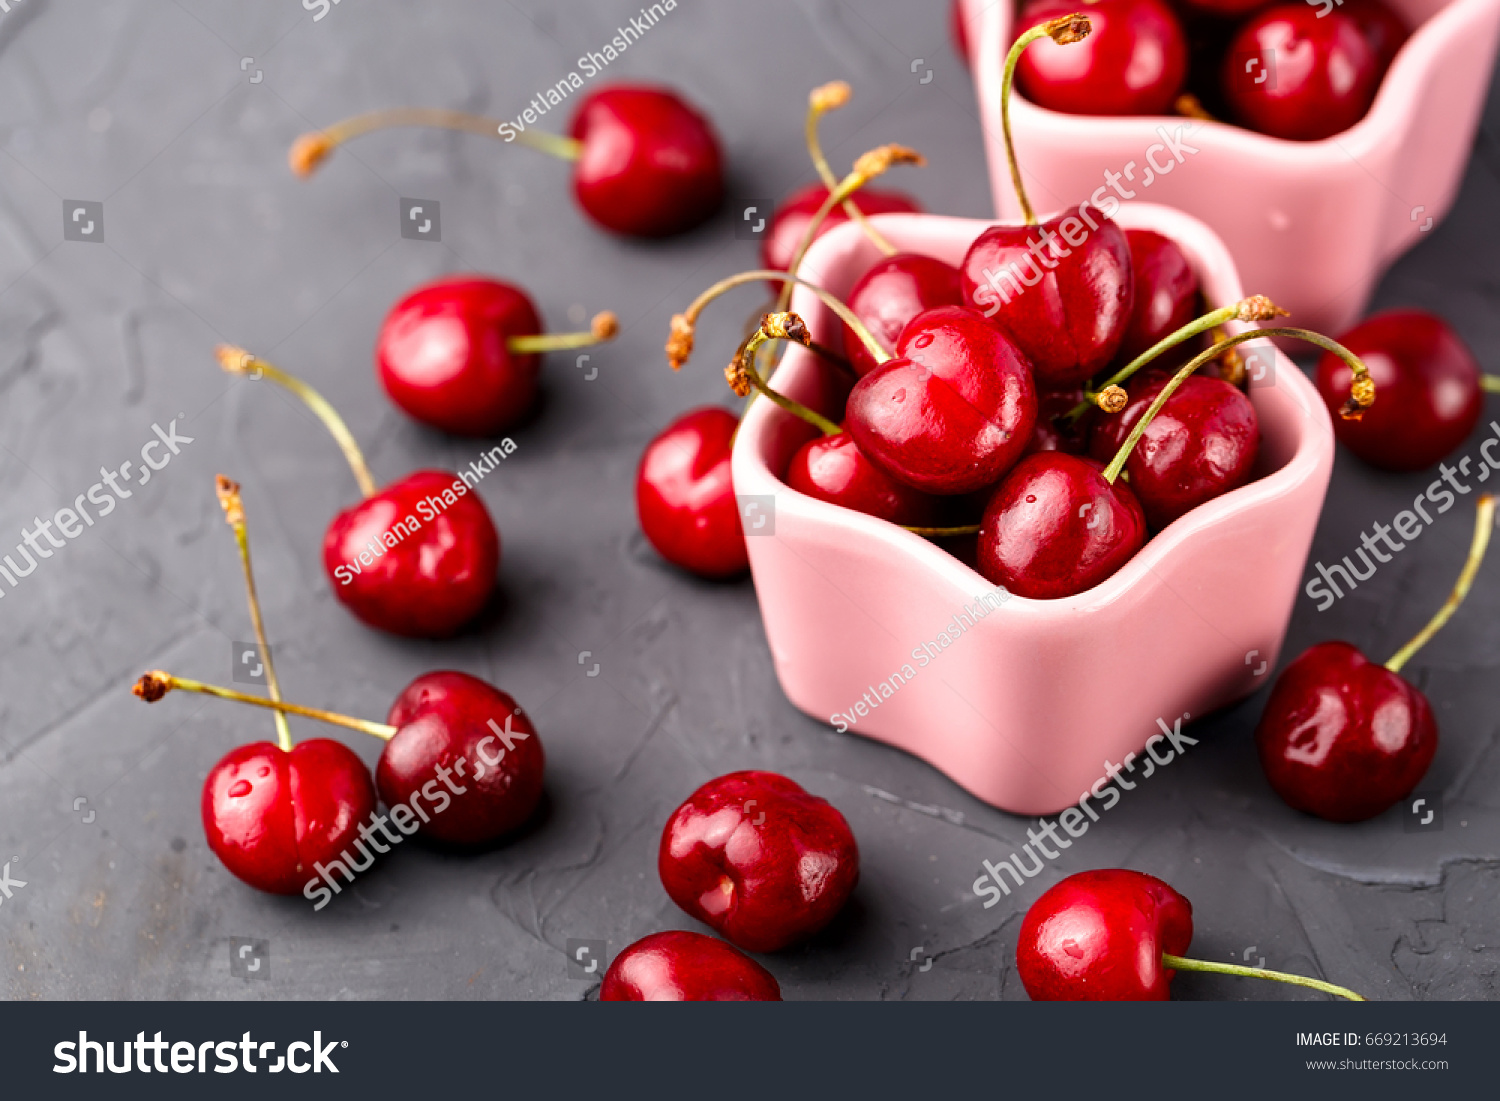 Ripe, juicy cherry in two ceramic pink bowls on the table #669213694